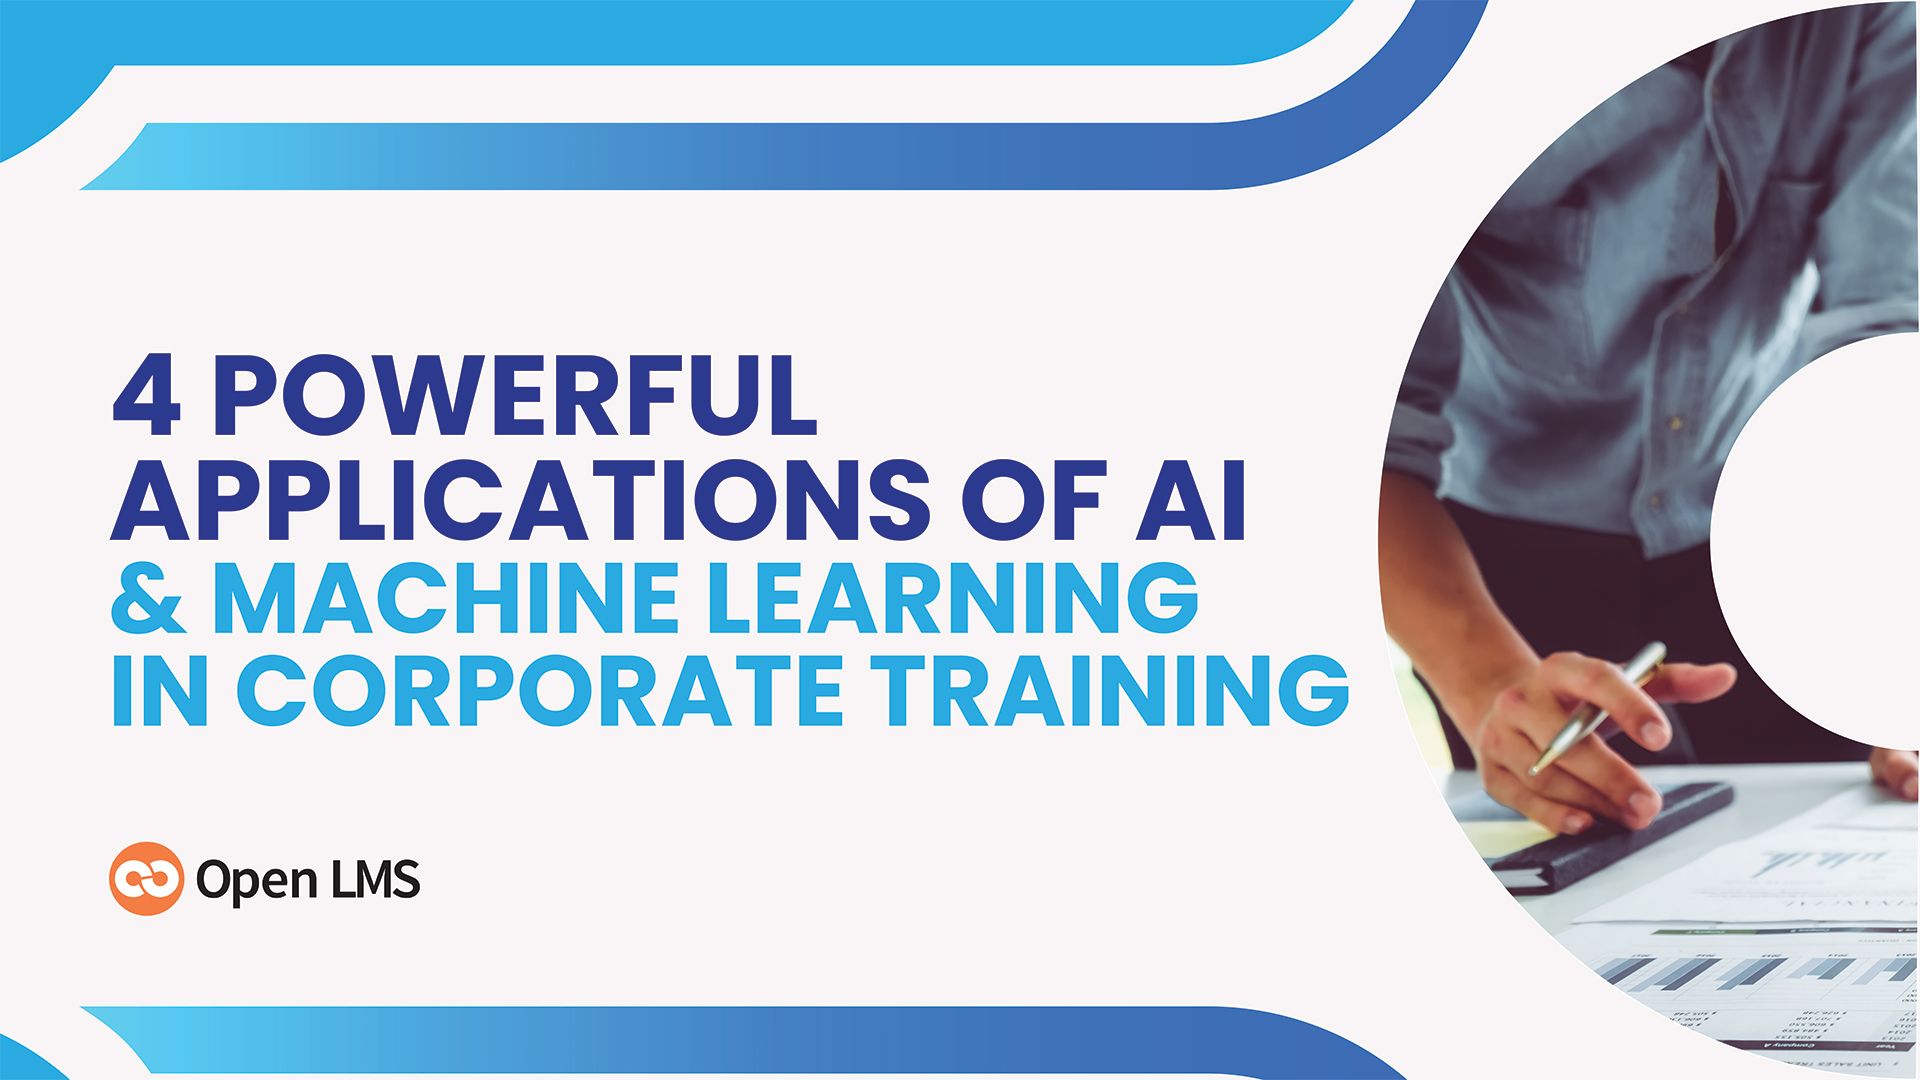 4 Powerful Applications of AI and Machine Learning in Corporate Training